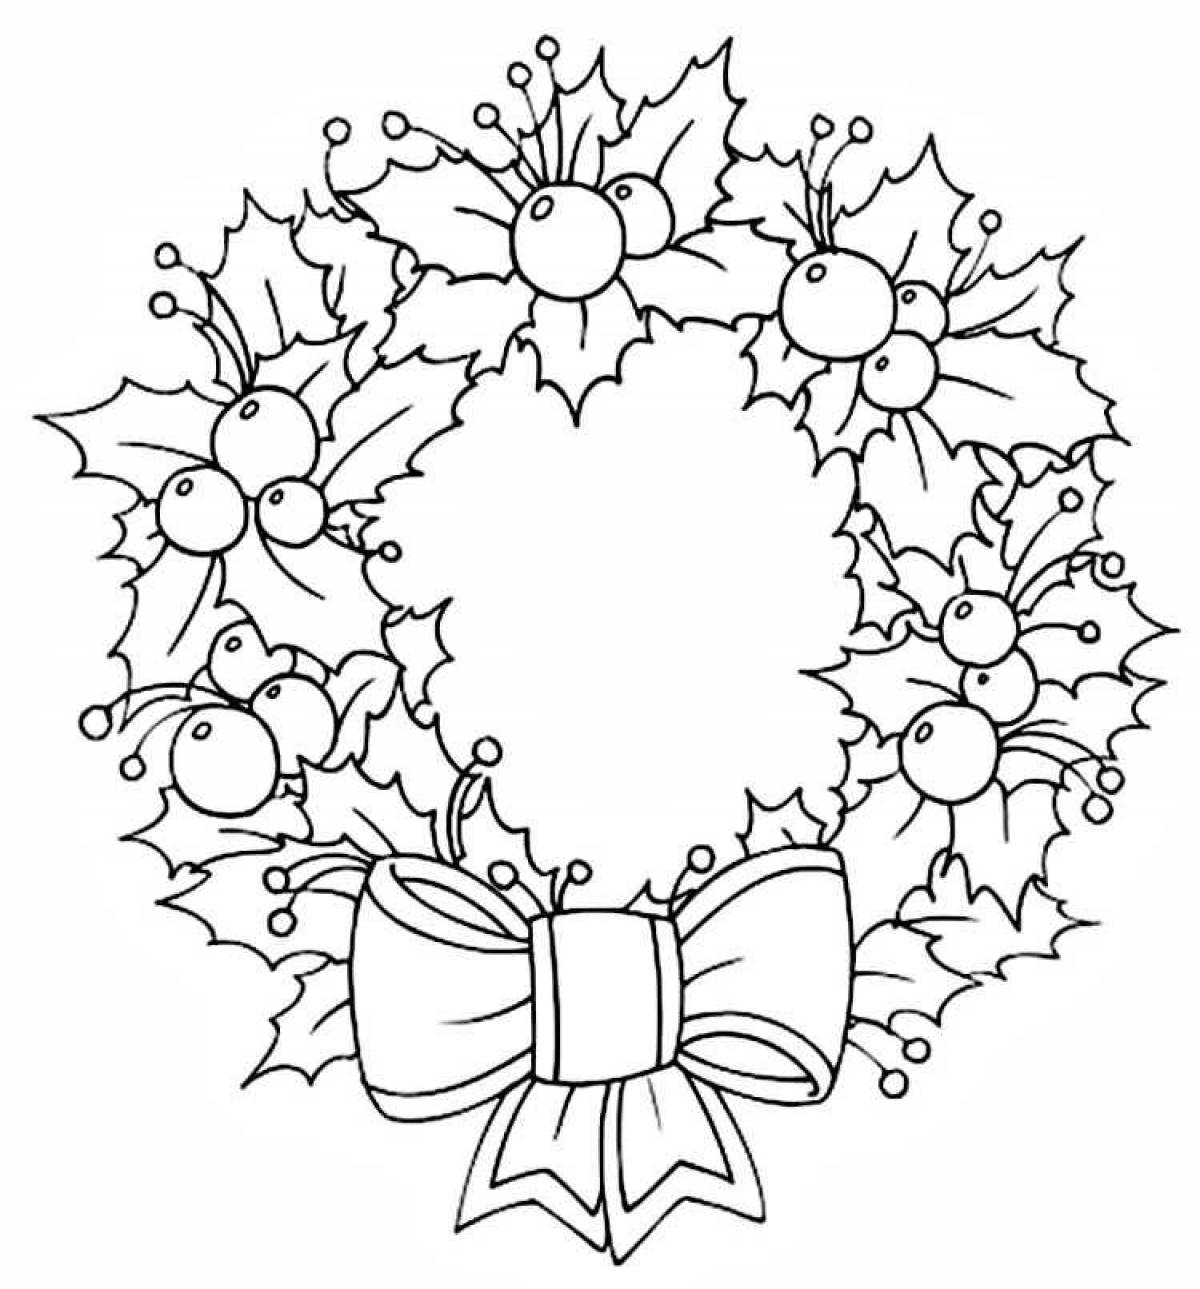 Coloring page animated Christmas wreath